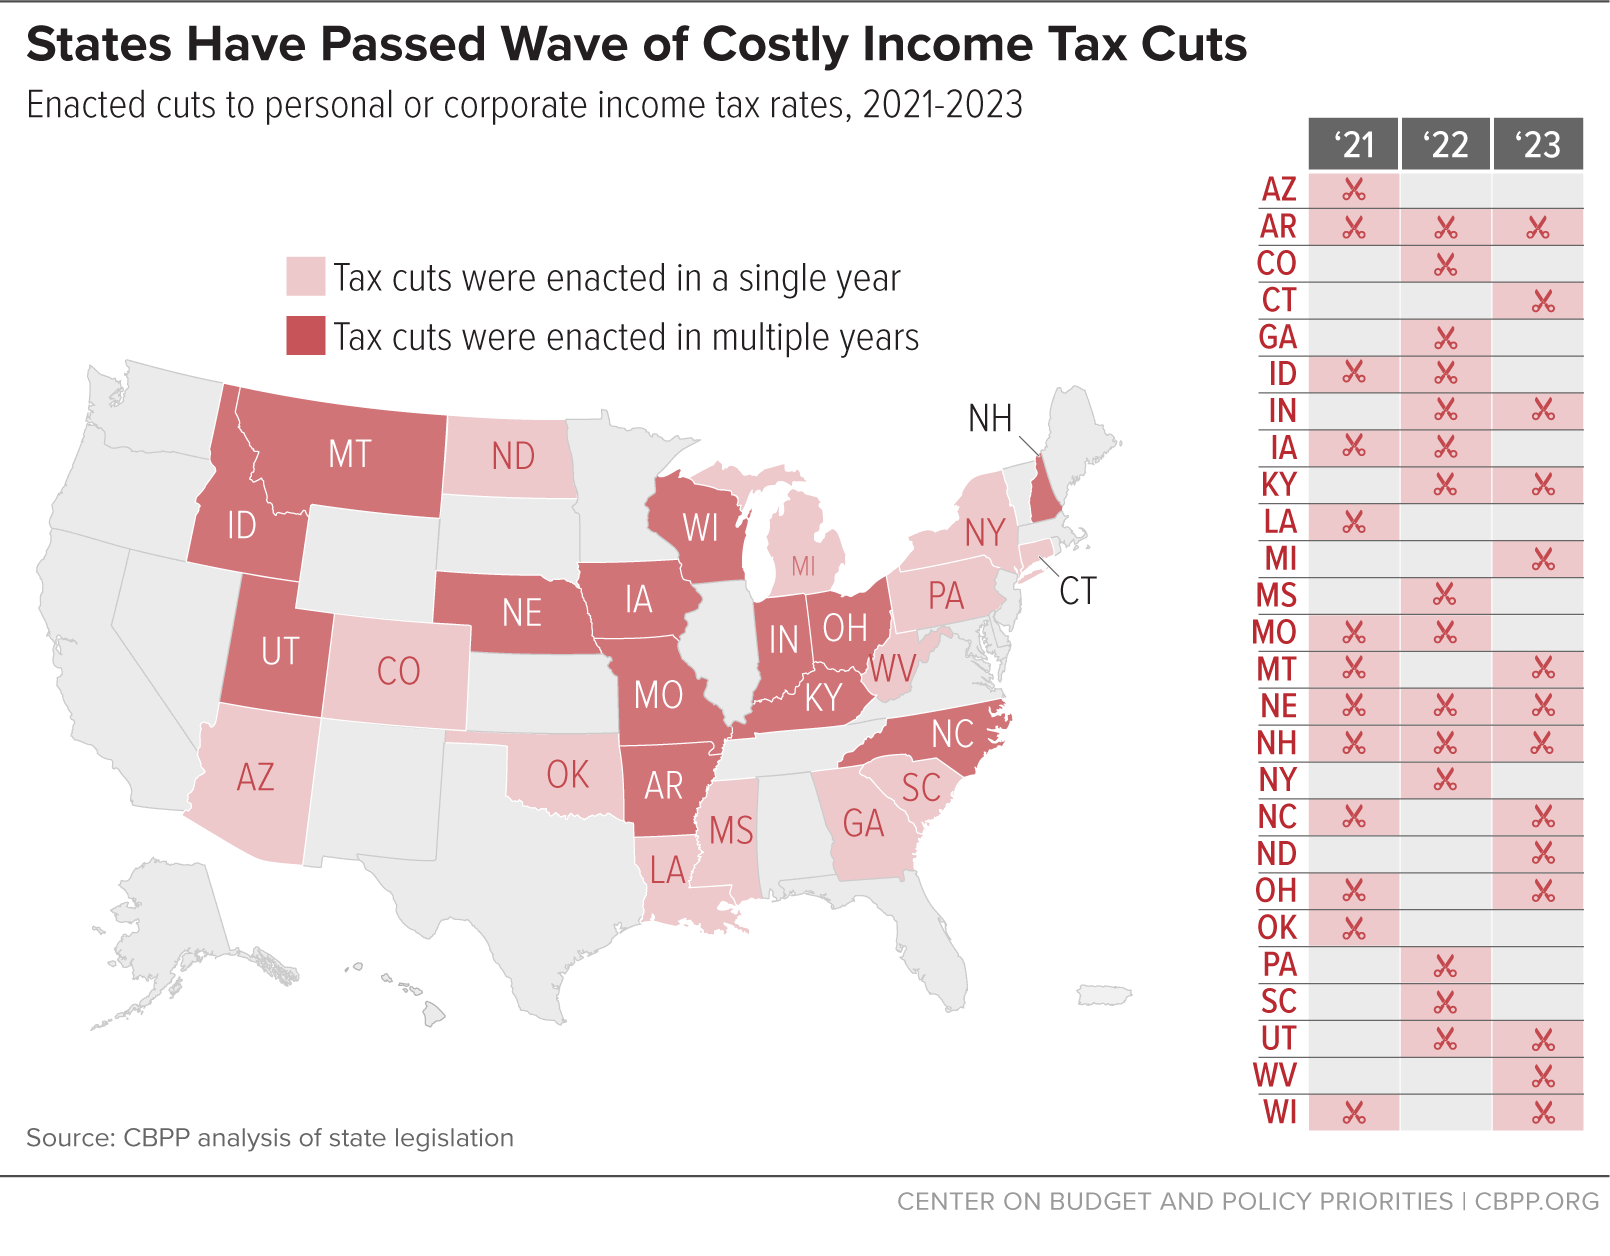 States Have Passed Wave of Costly Income Tax Cuts